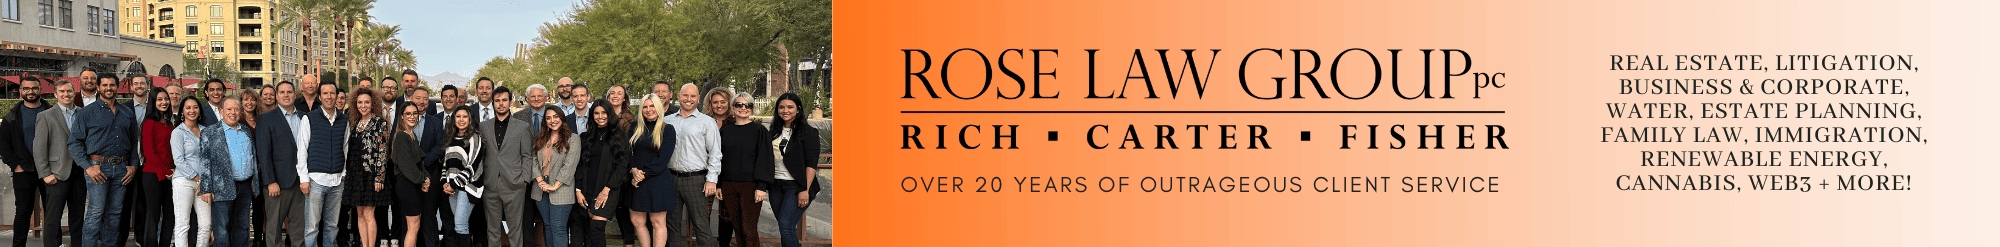 Rose Law Group Business & Construction - AD